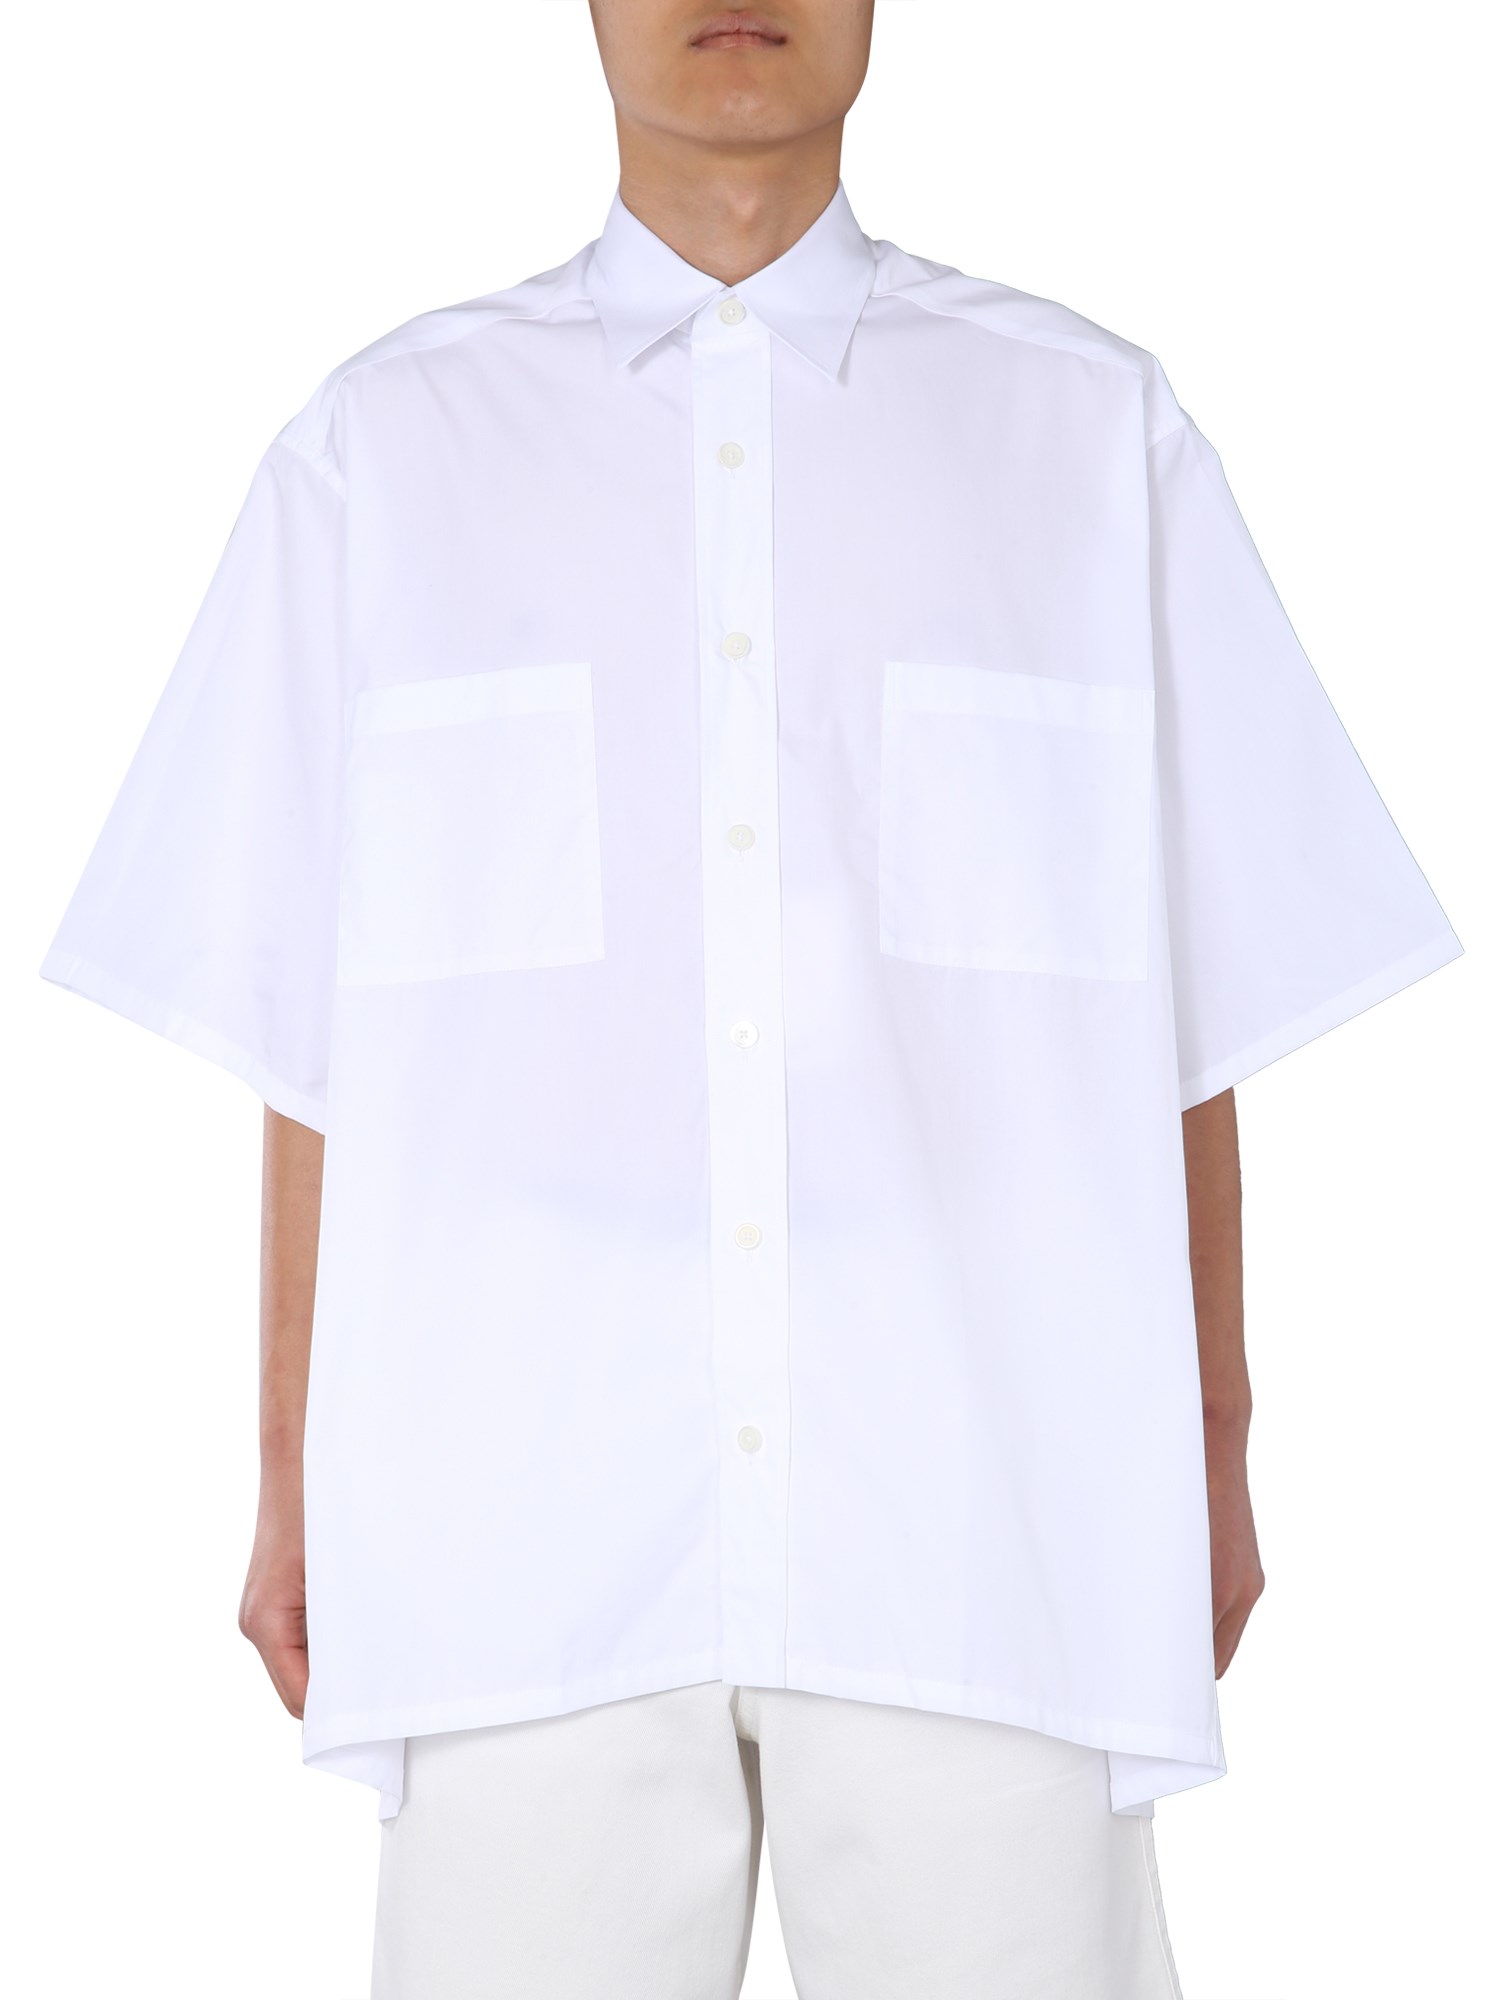 GIVENCHY OVERSIZE FIT SHIRT,175310